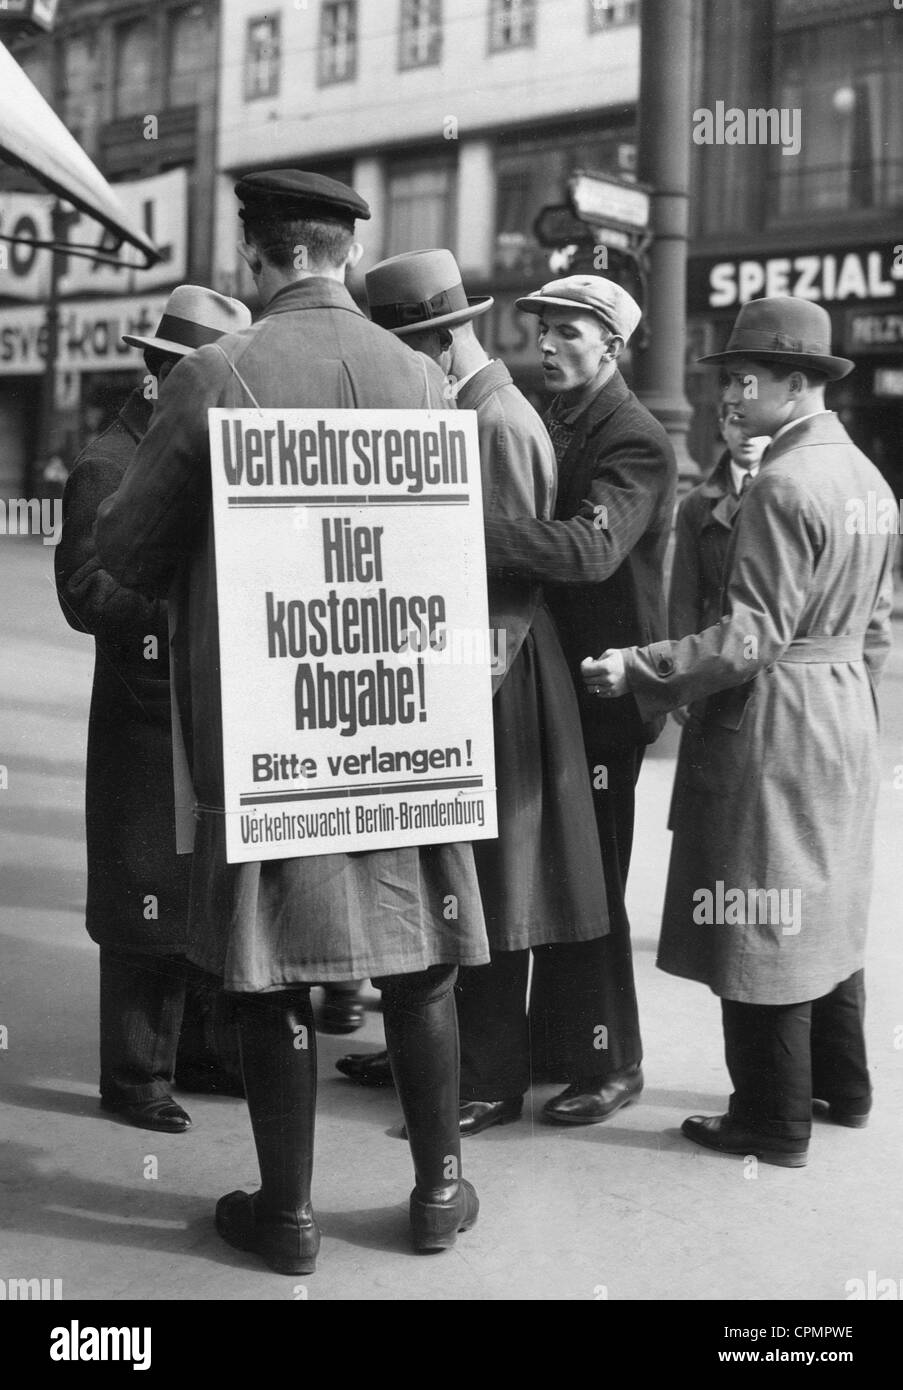 Issuing new traffic rules by the unemployed, 1932 Stock Photo